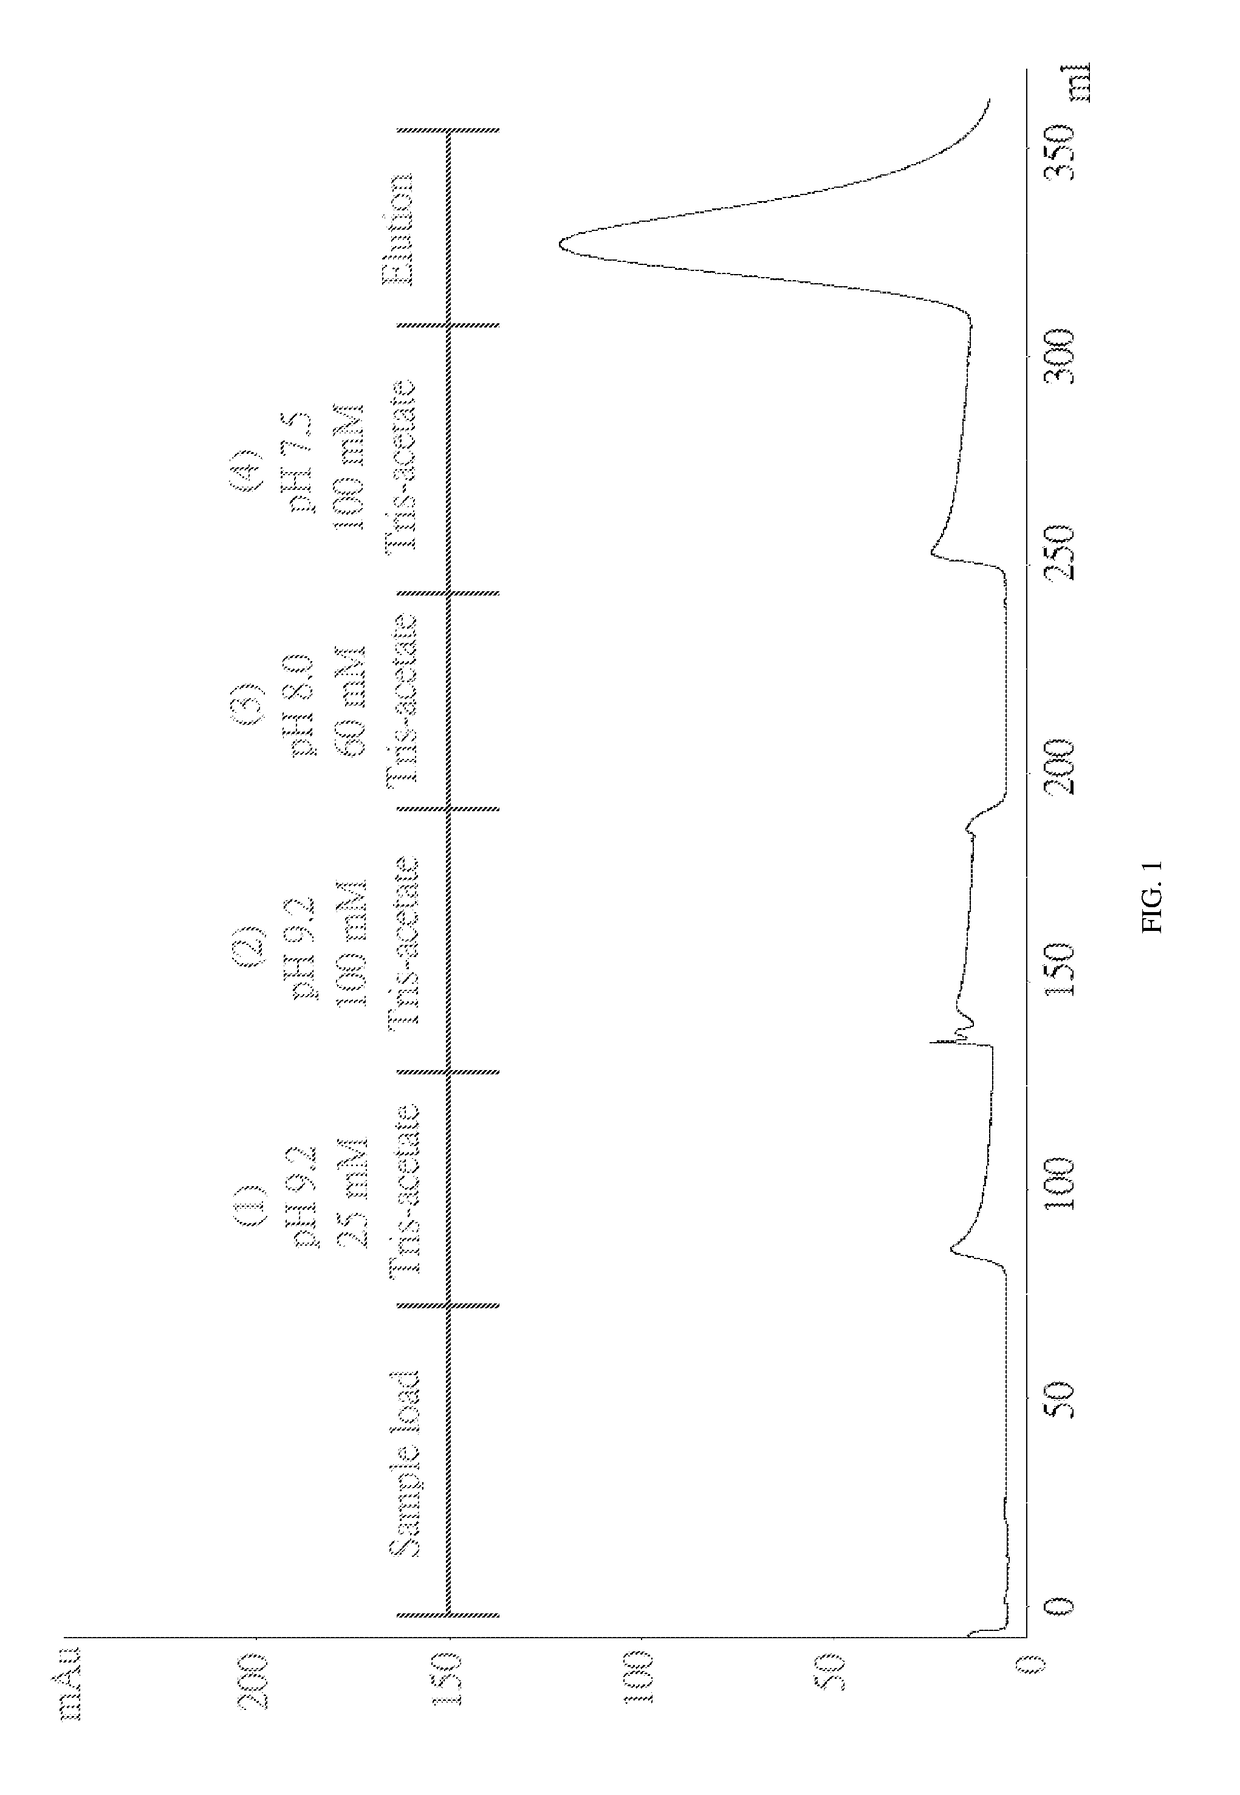 Production of high purity chondroitinase ABC